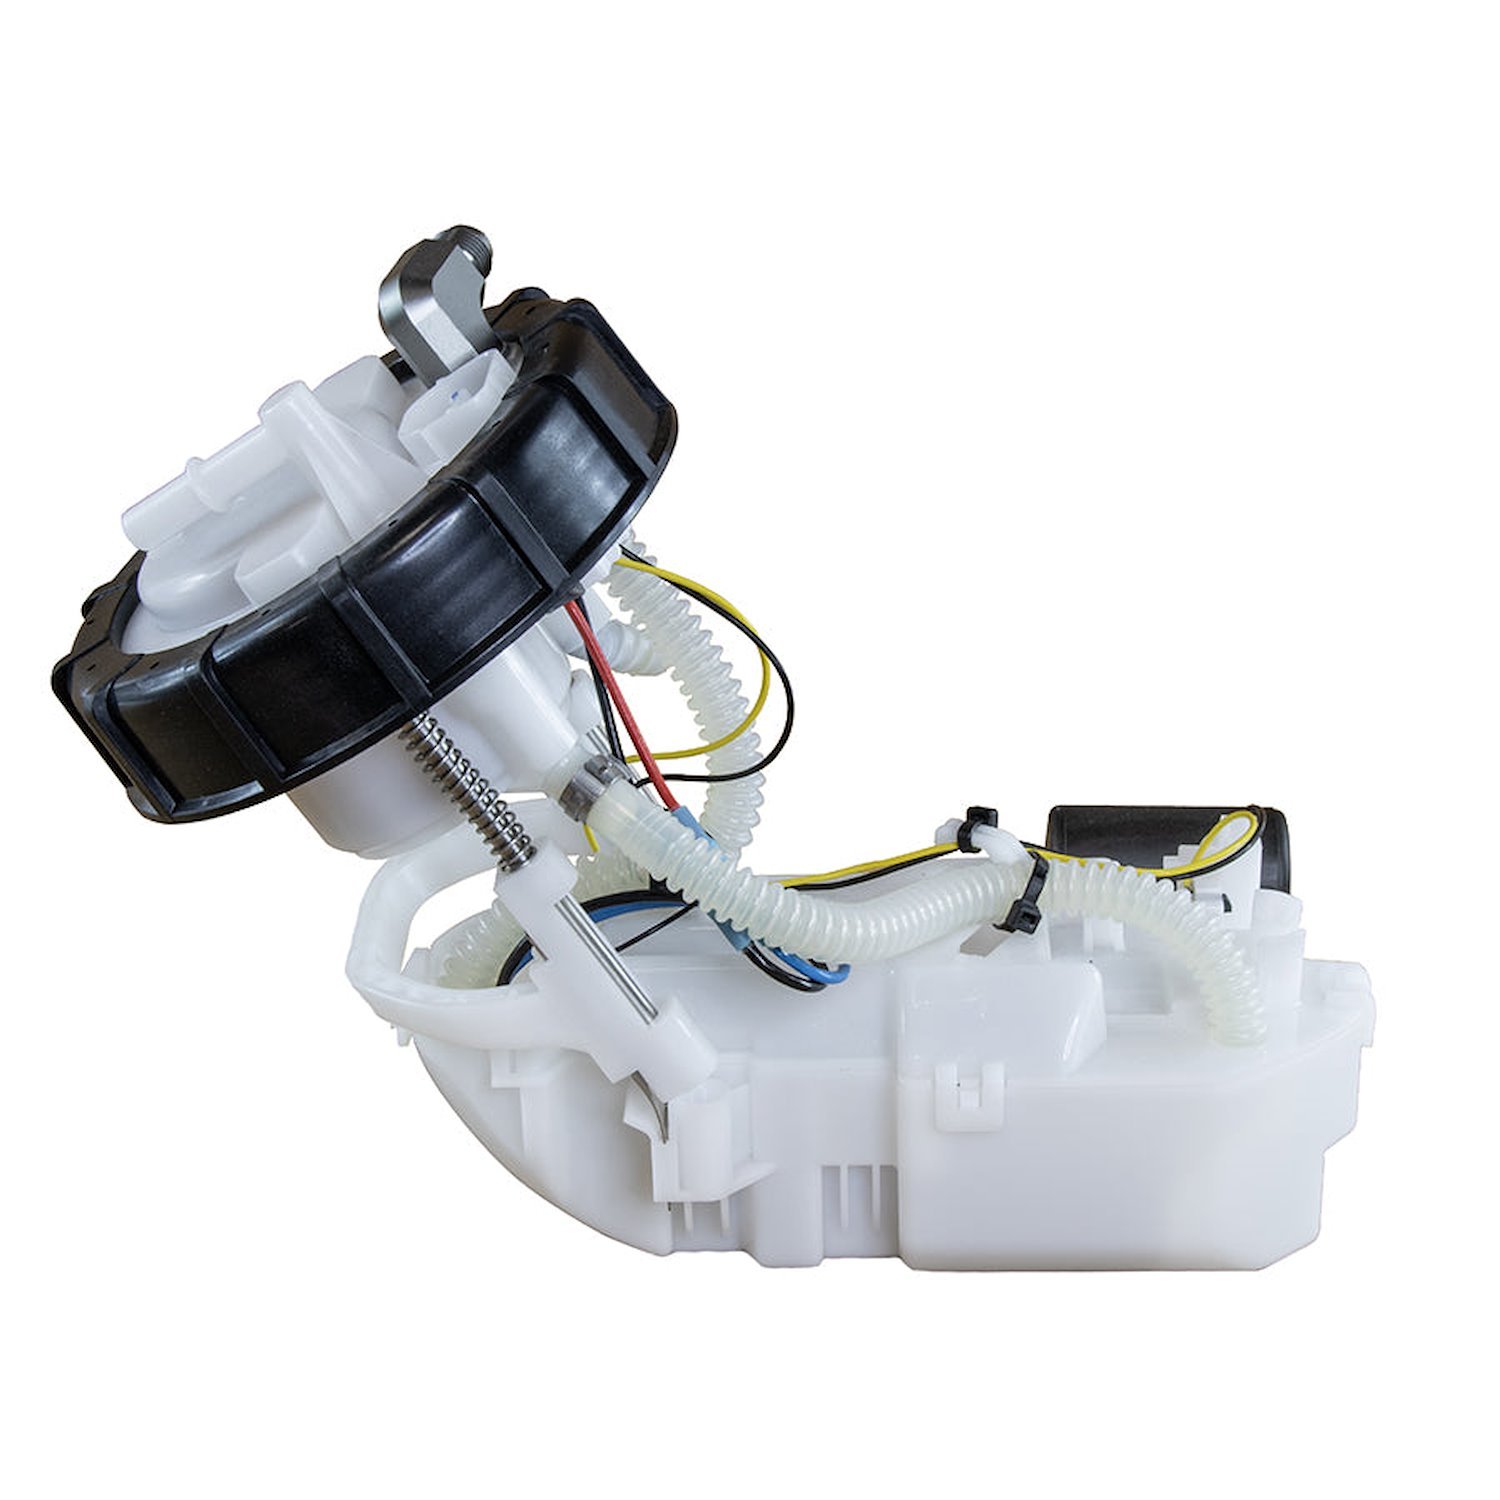 94017040 DW400 Pump Module for 7th Gen 2001-05 Honda Civic and 2002-06 Acura RSX